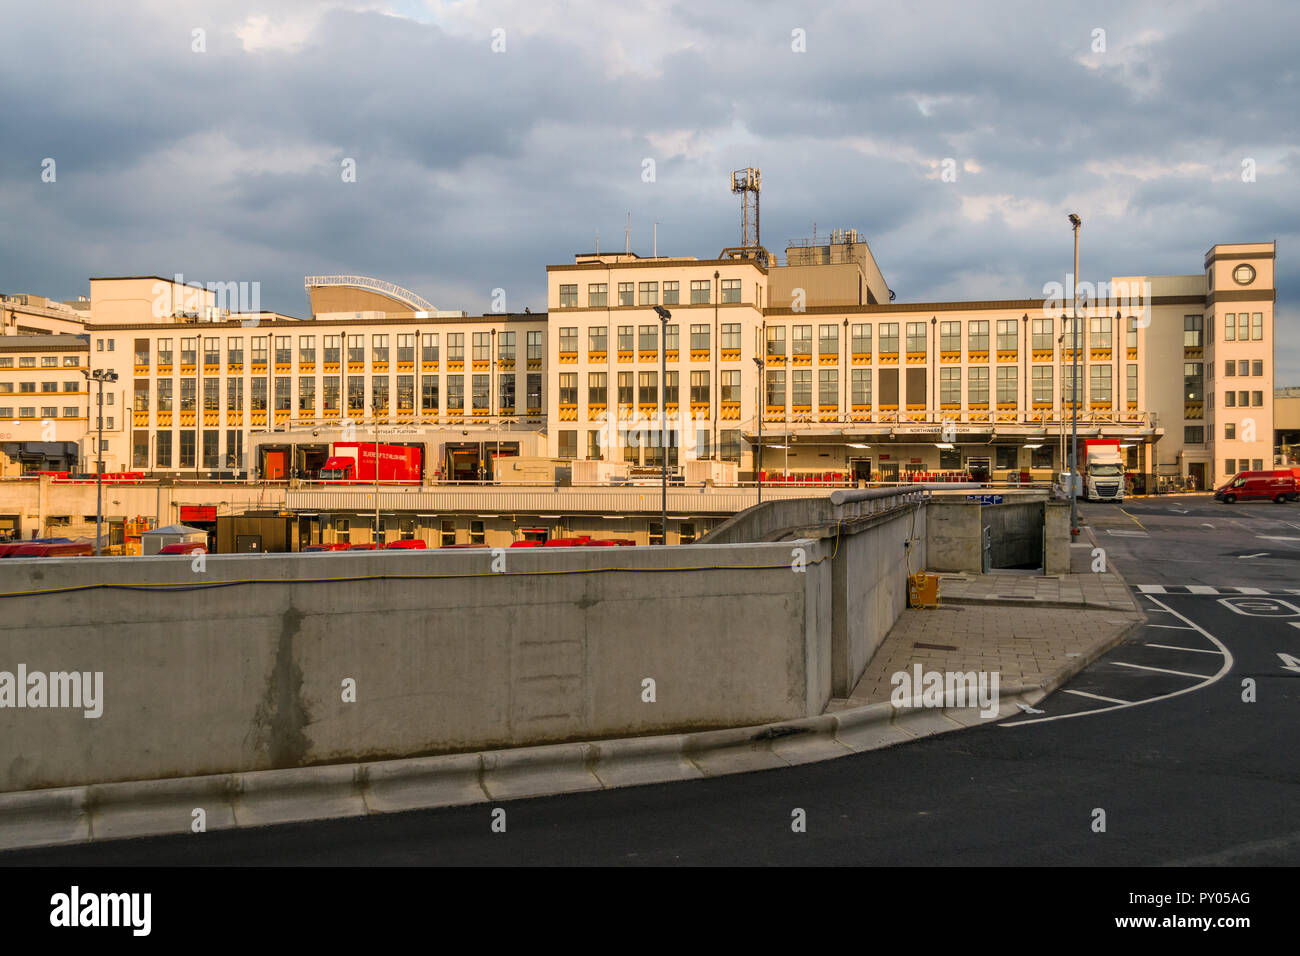 The Mount Pleasant Mail Centre, officially named London Central Mail Centre, rear showing Royal Mail lorries and vehicles, London, UK Stock Photo